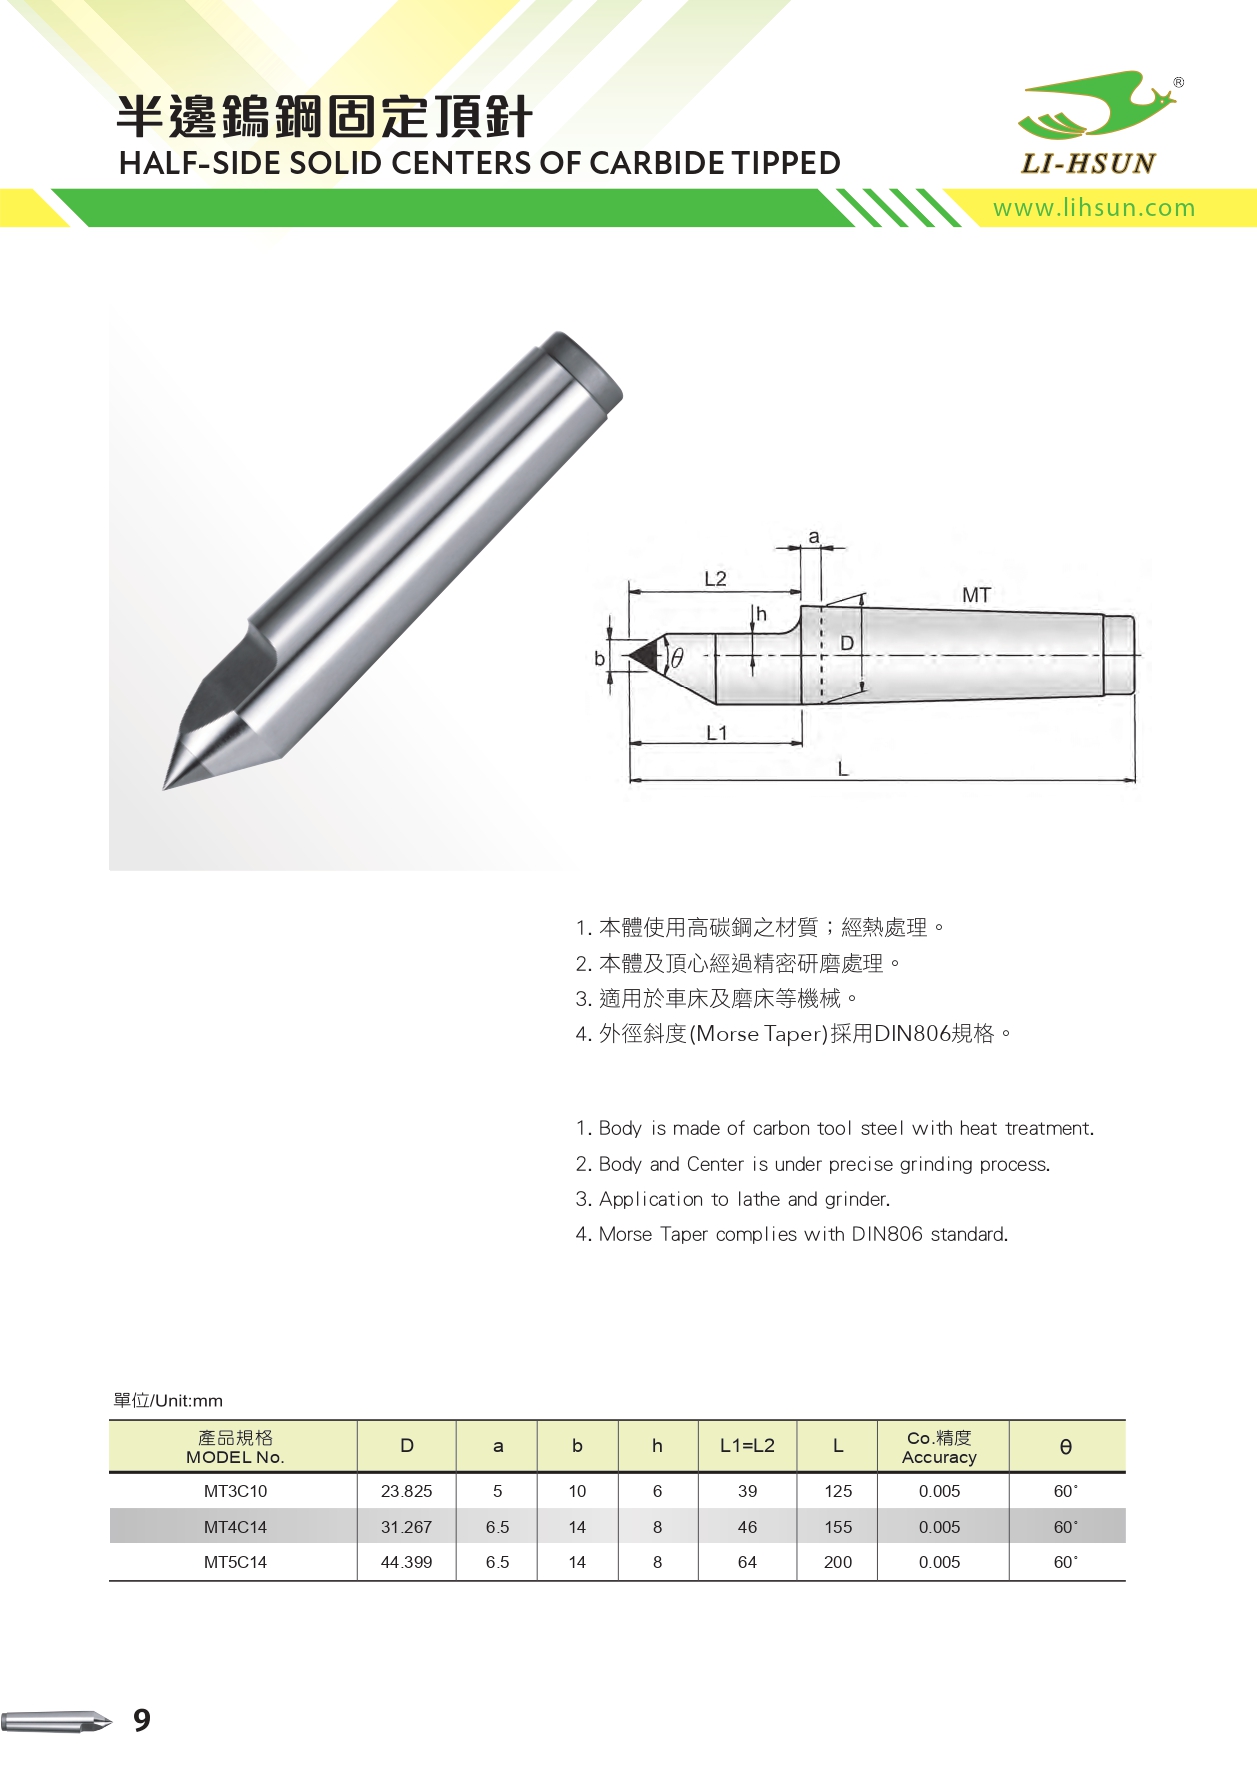 Catalog|HALF-SIDE SOLID CENTERS OF CARBIDE TIPPED